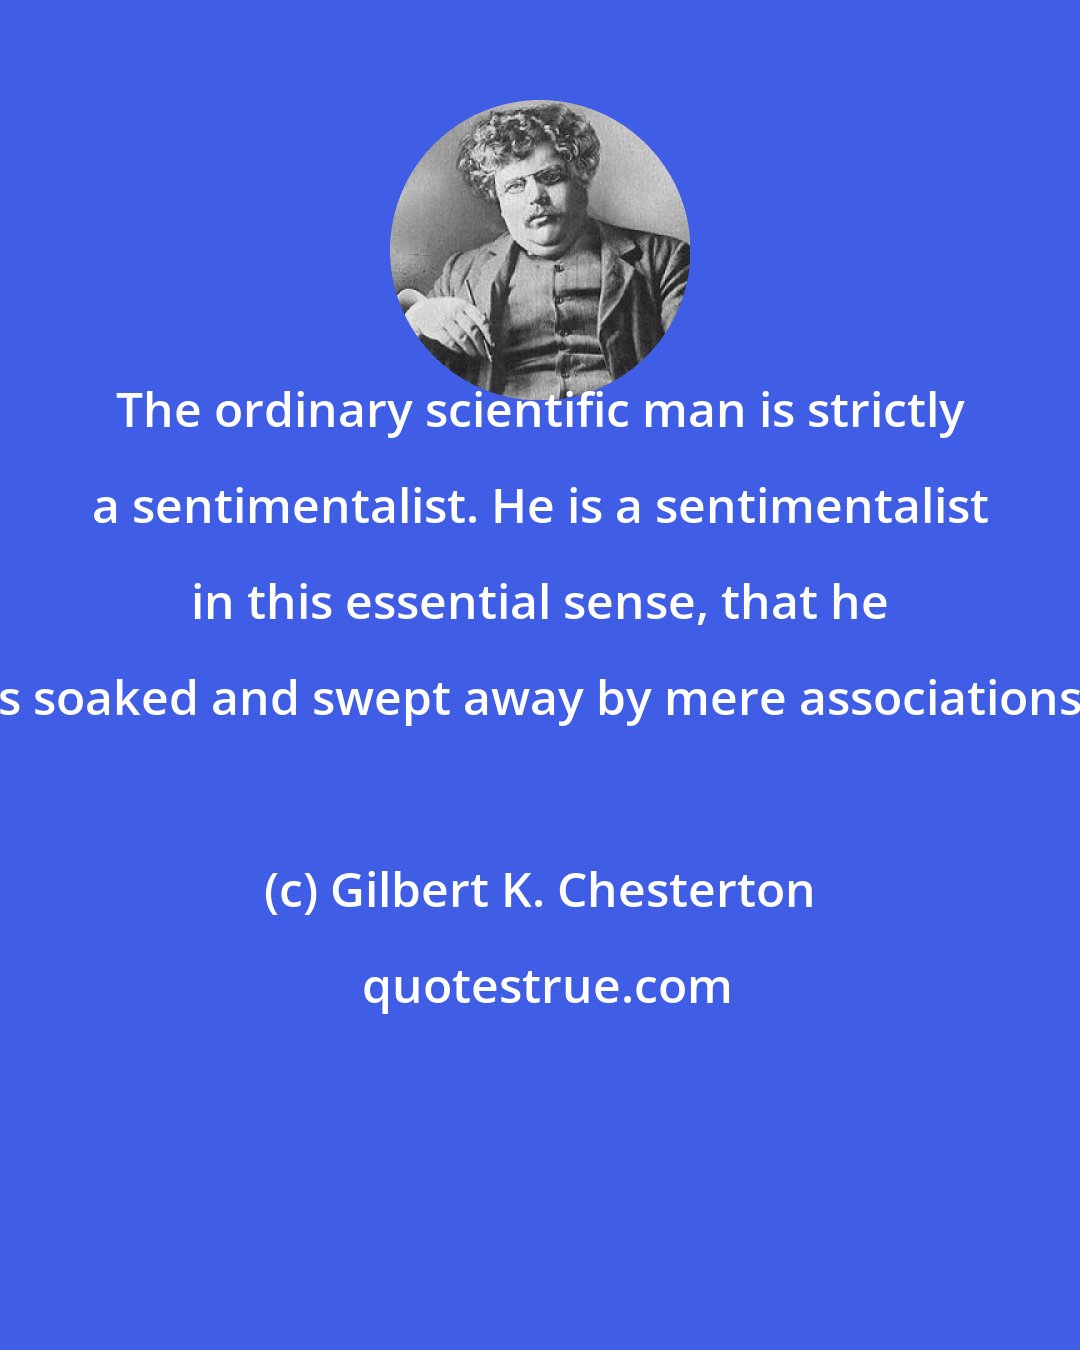 Gilbert K. Chesterton: The ordinary scientific man is strictly a sentimentalist. He is a sentimentalist in this essential sense, that he is soaked and swept away by mere associations.